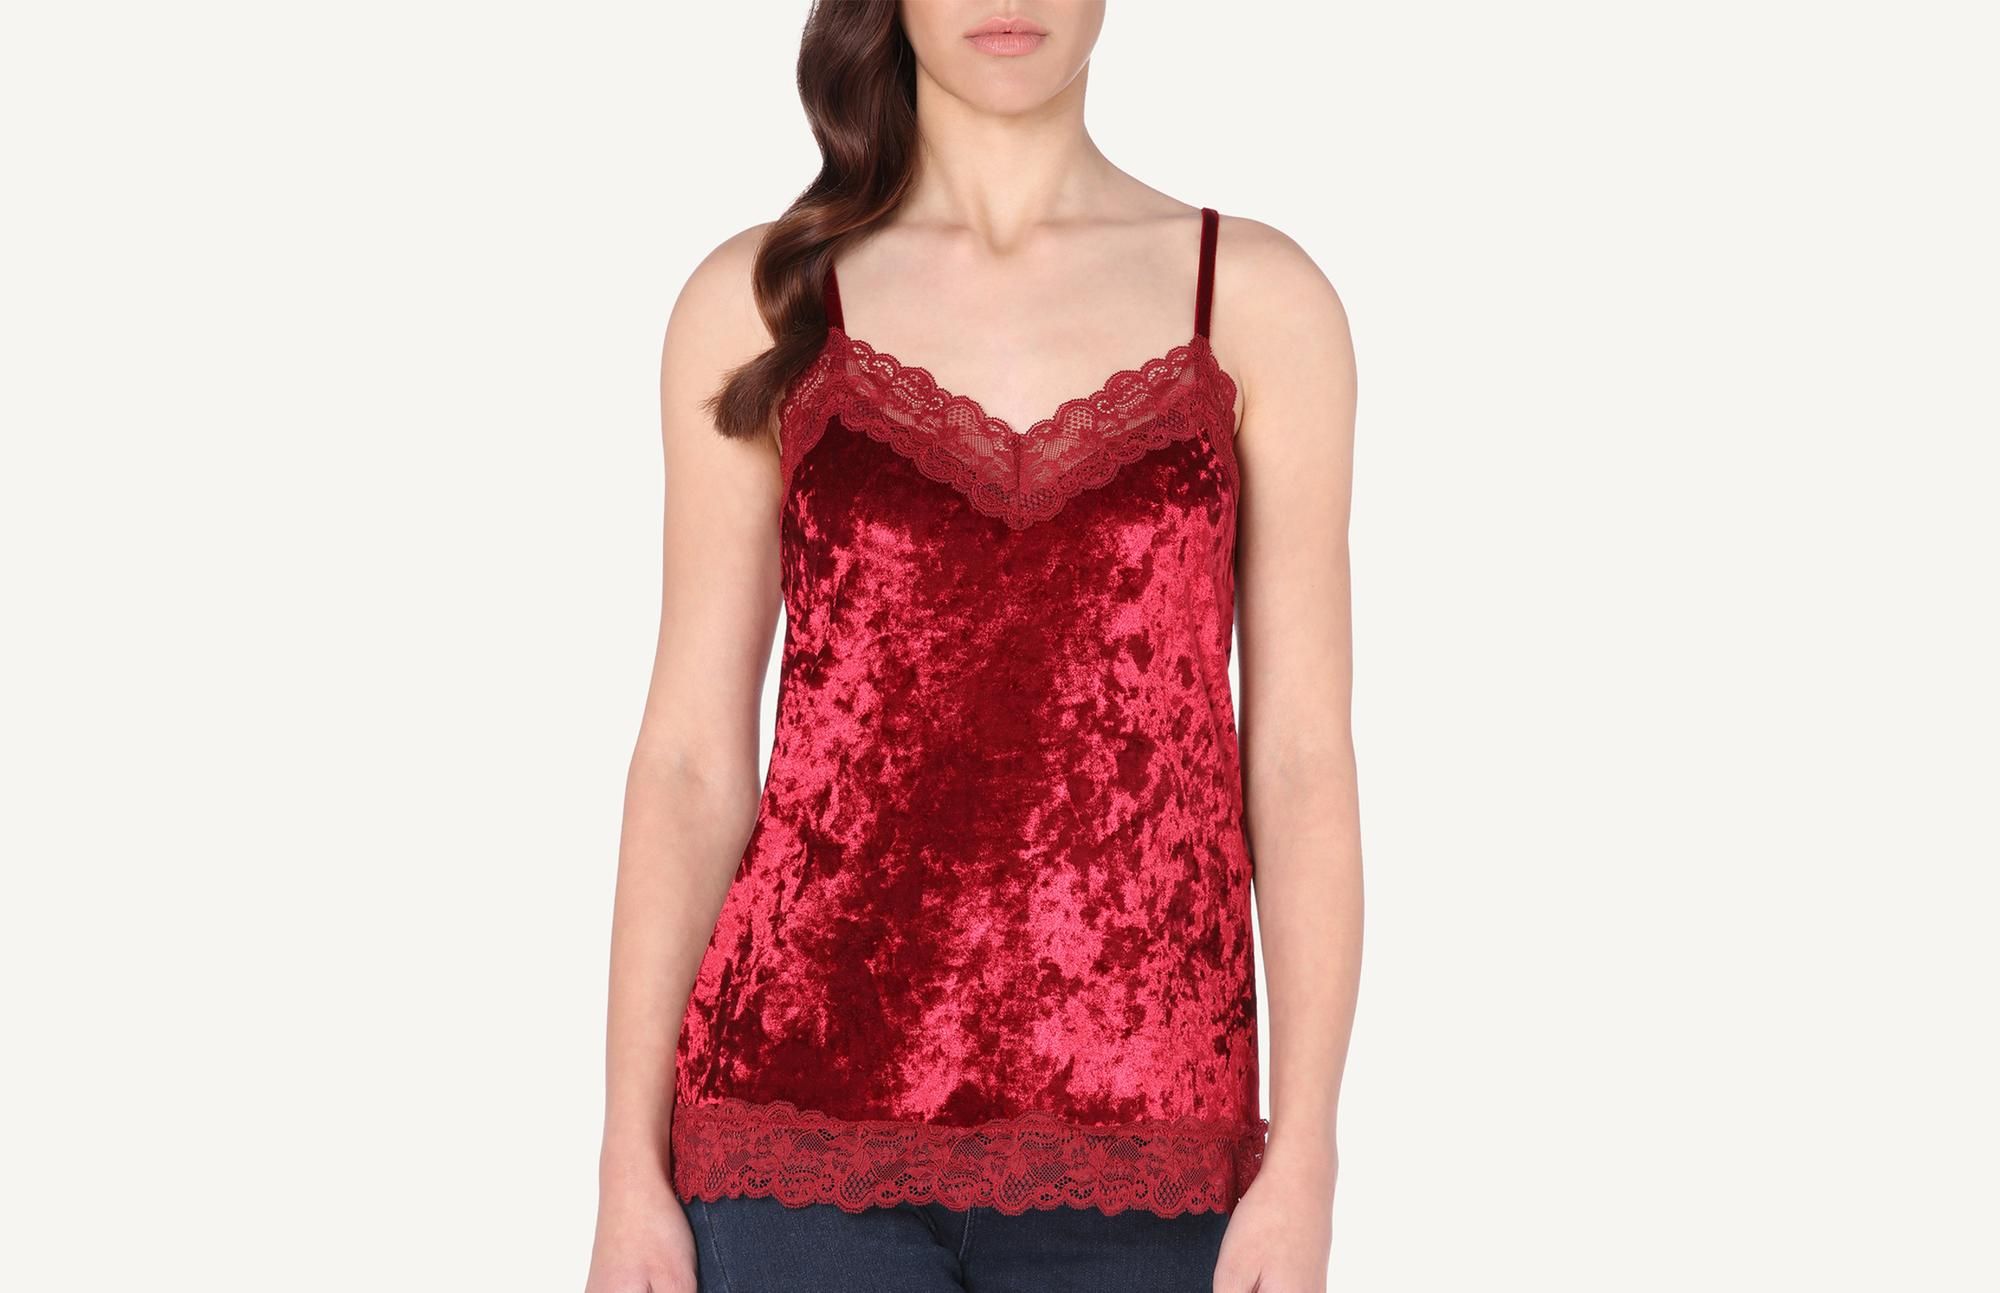 Hammered Velvet and Lace Top | Intimissimi UK